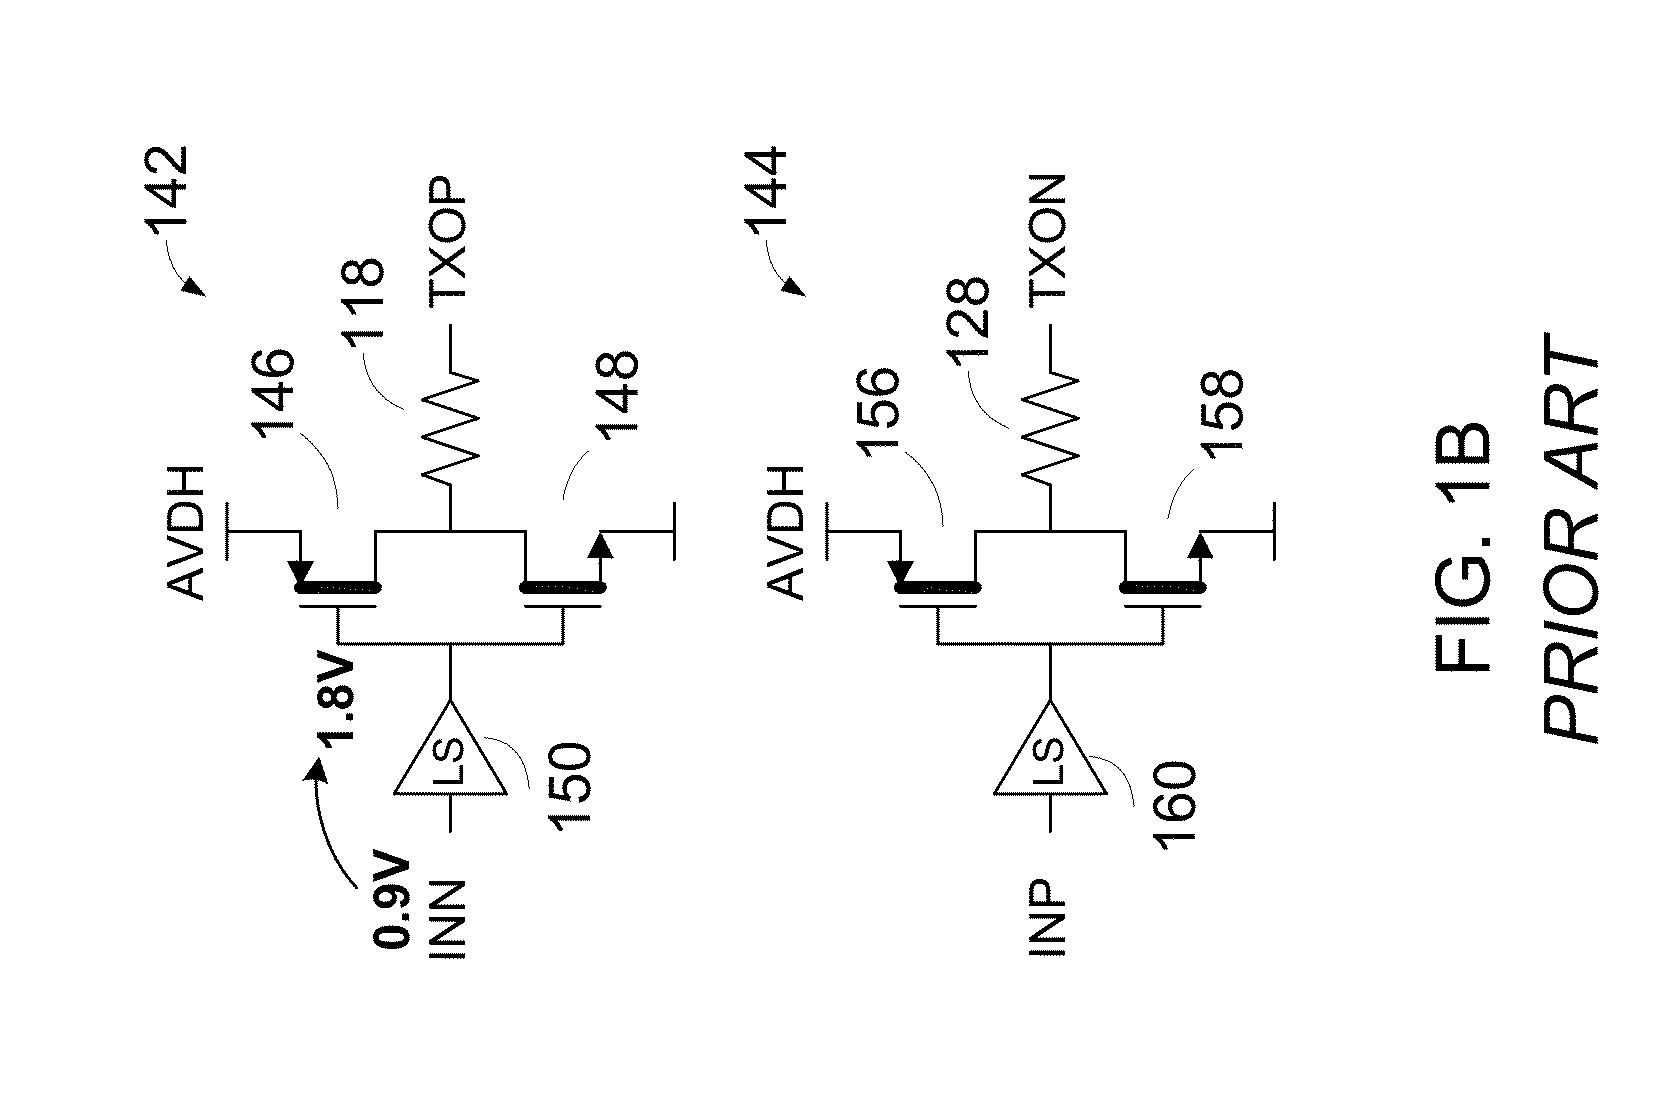 Scalable high-swing transmitter with rise and/or fall time mismatch compensation